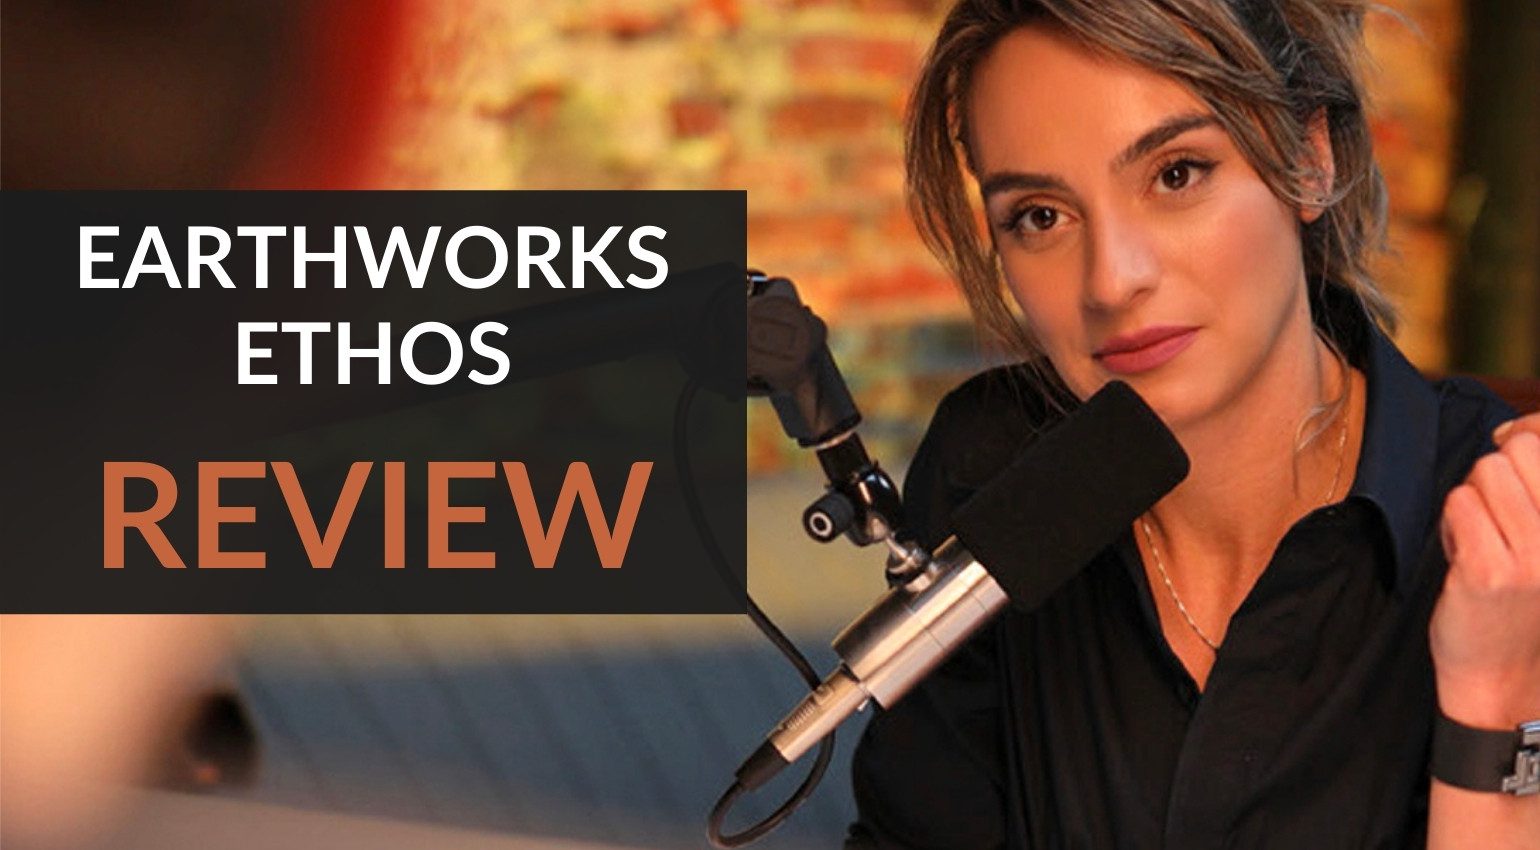 Review: Earthworks Ethos XLR Broadcasting Microphone - Une nouvelle norme?